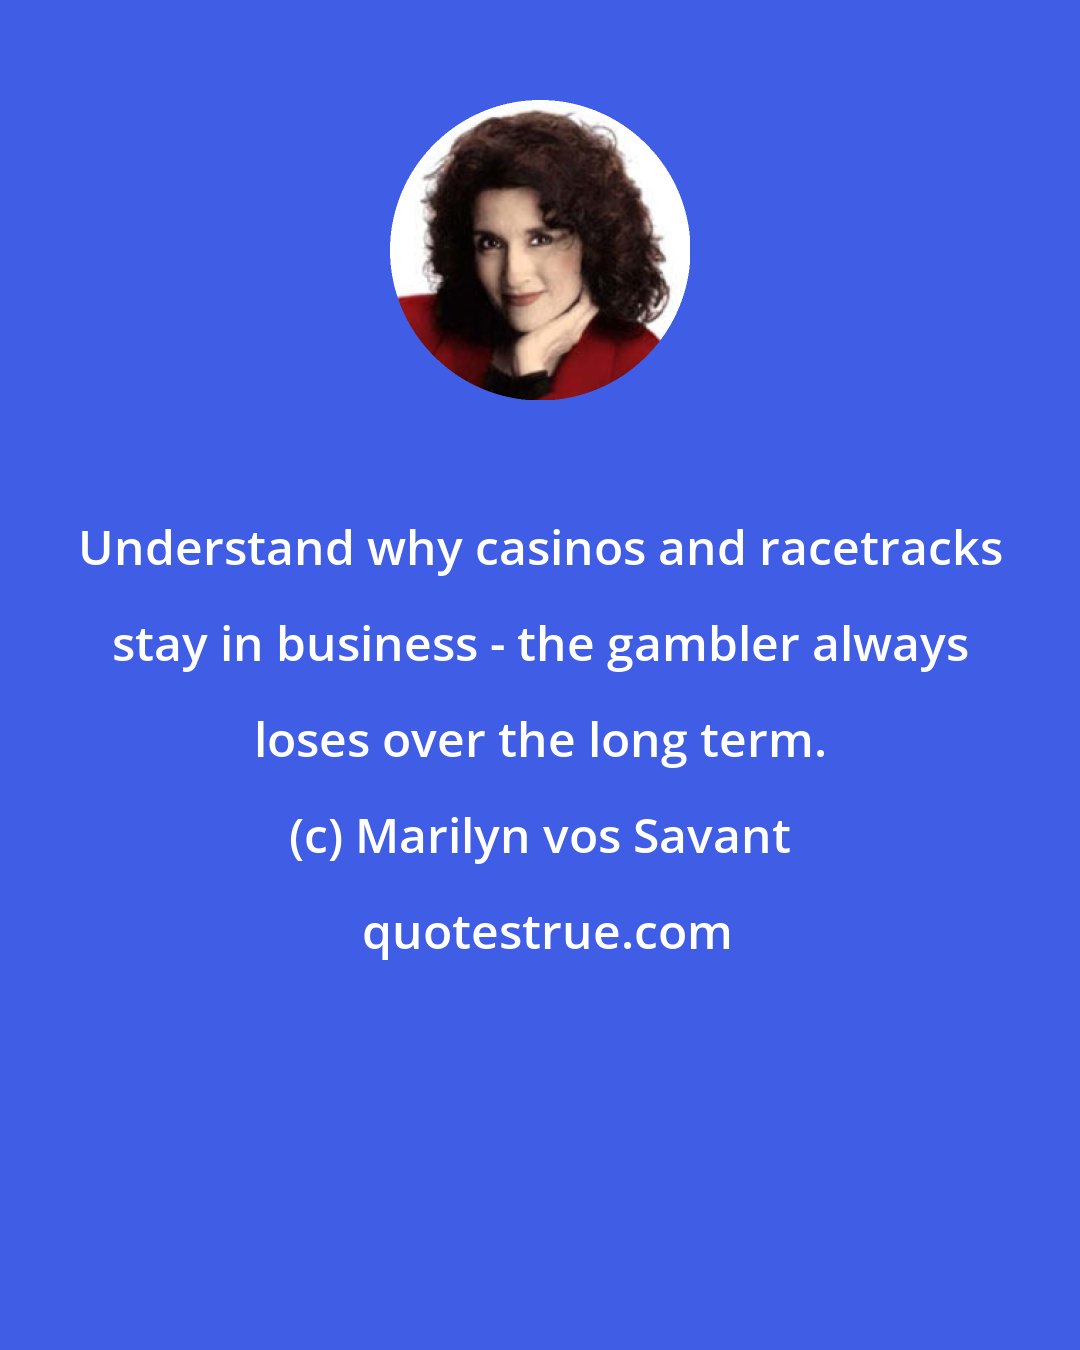 Marilyn vos Savant: Understand why casinos and racetracks stay in business - the gambler always loses over the long term.